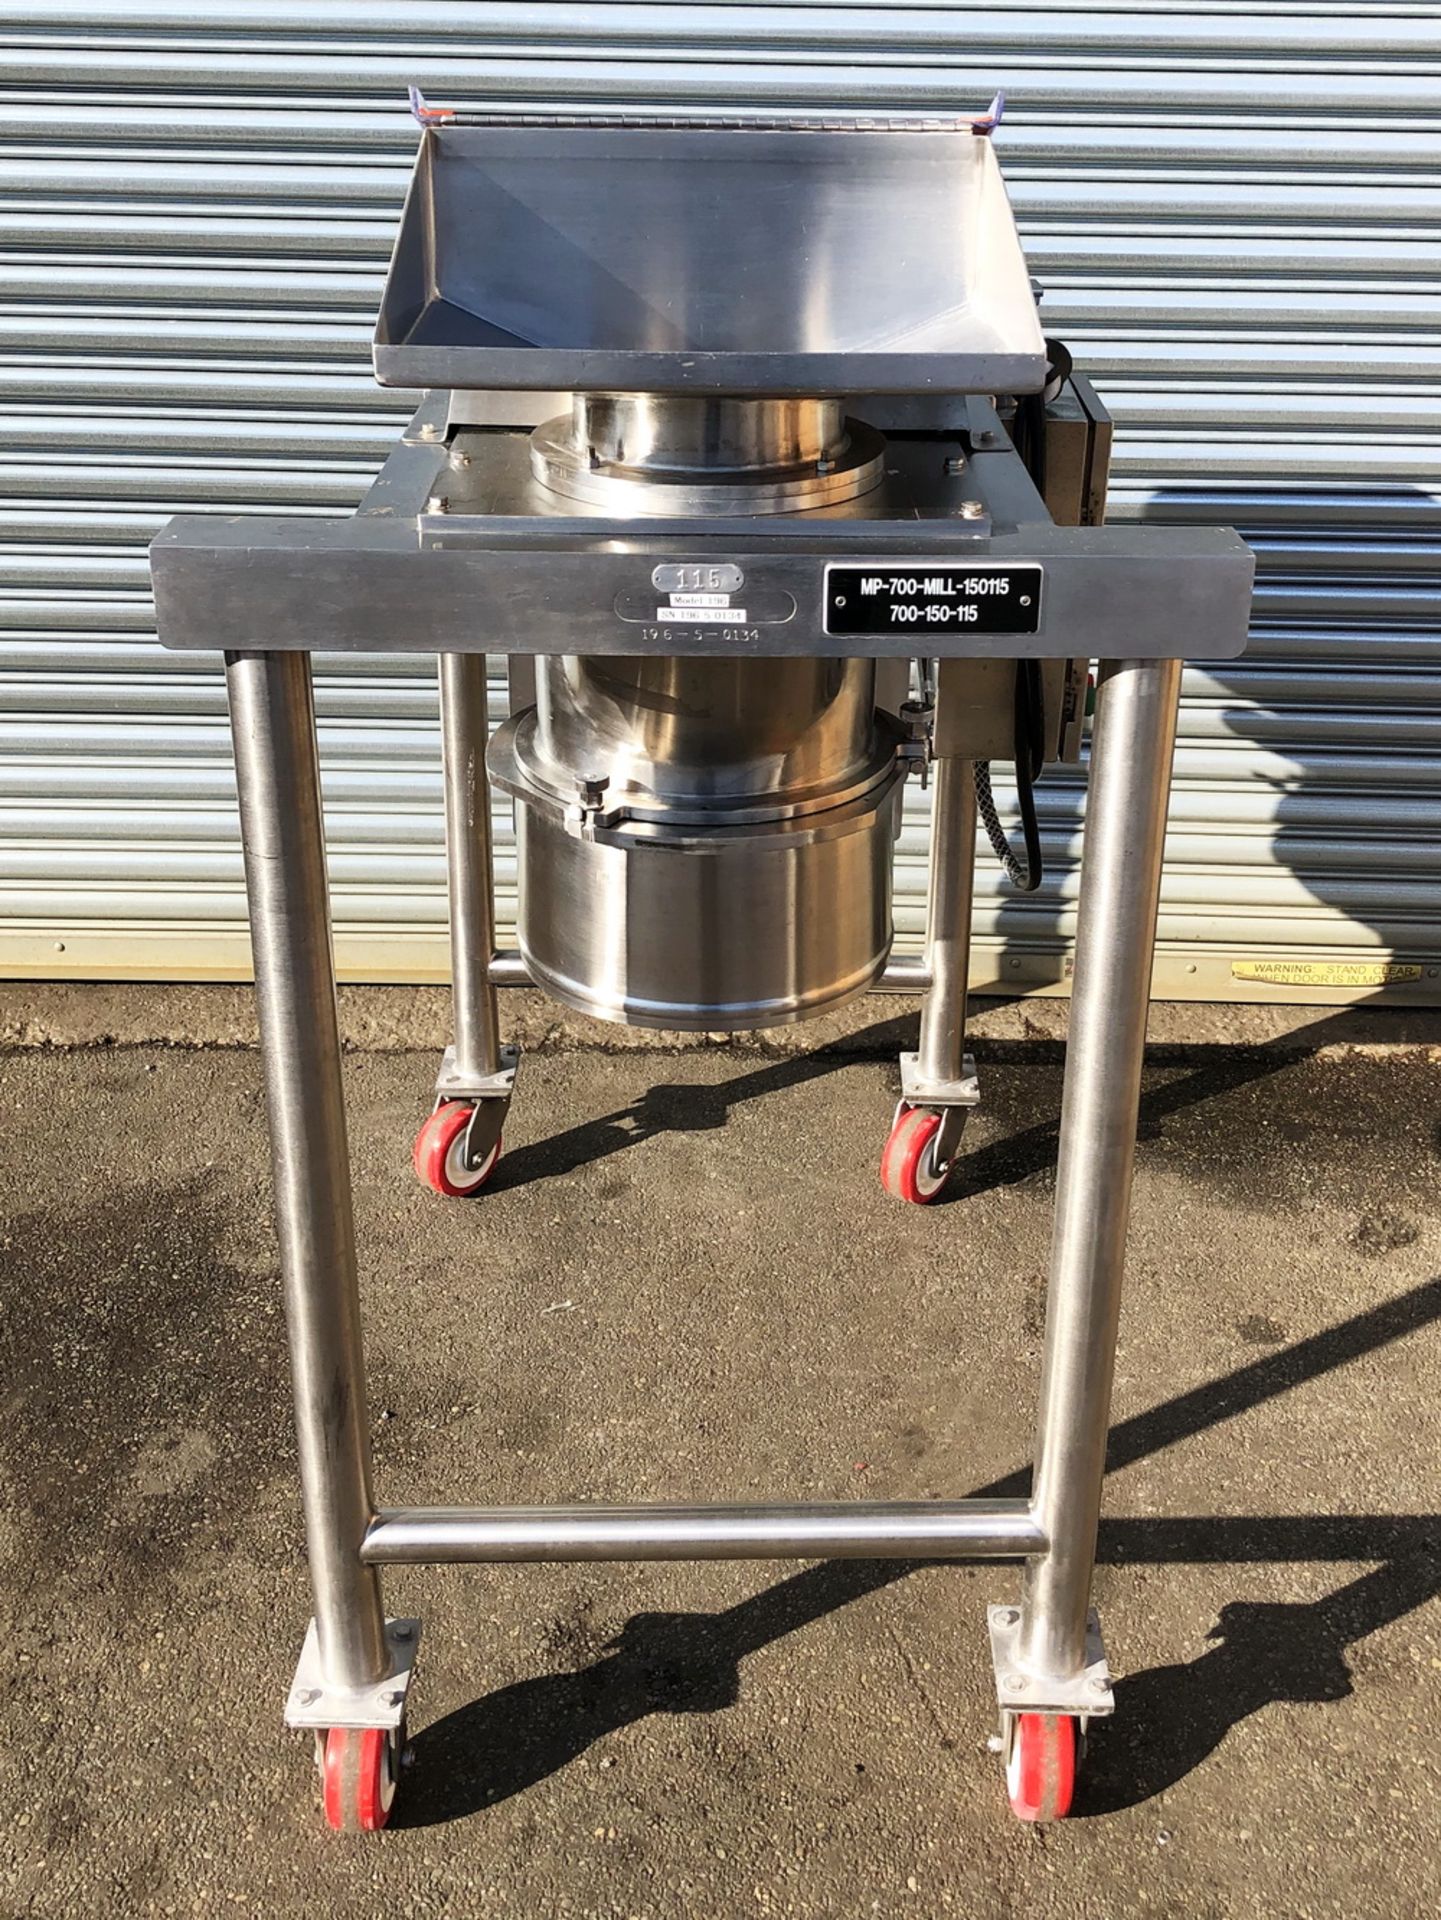 Quadro Stainless Steel Comil, Model 196 - Image 12 of 12